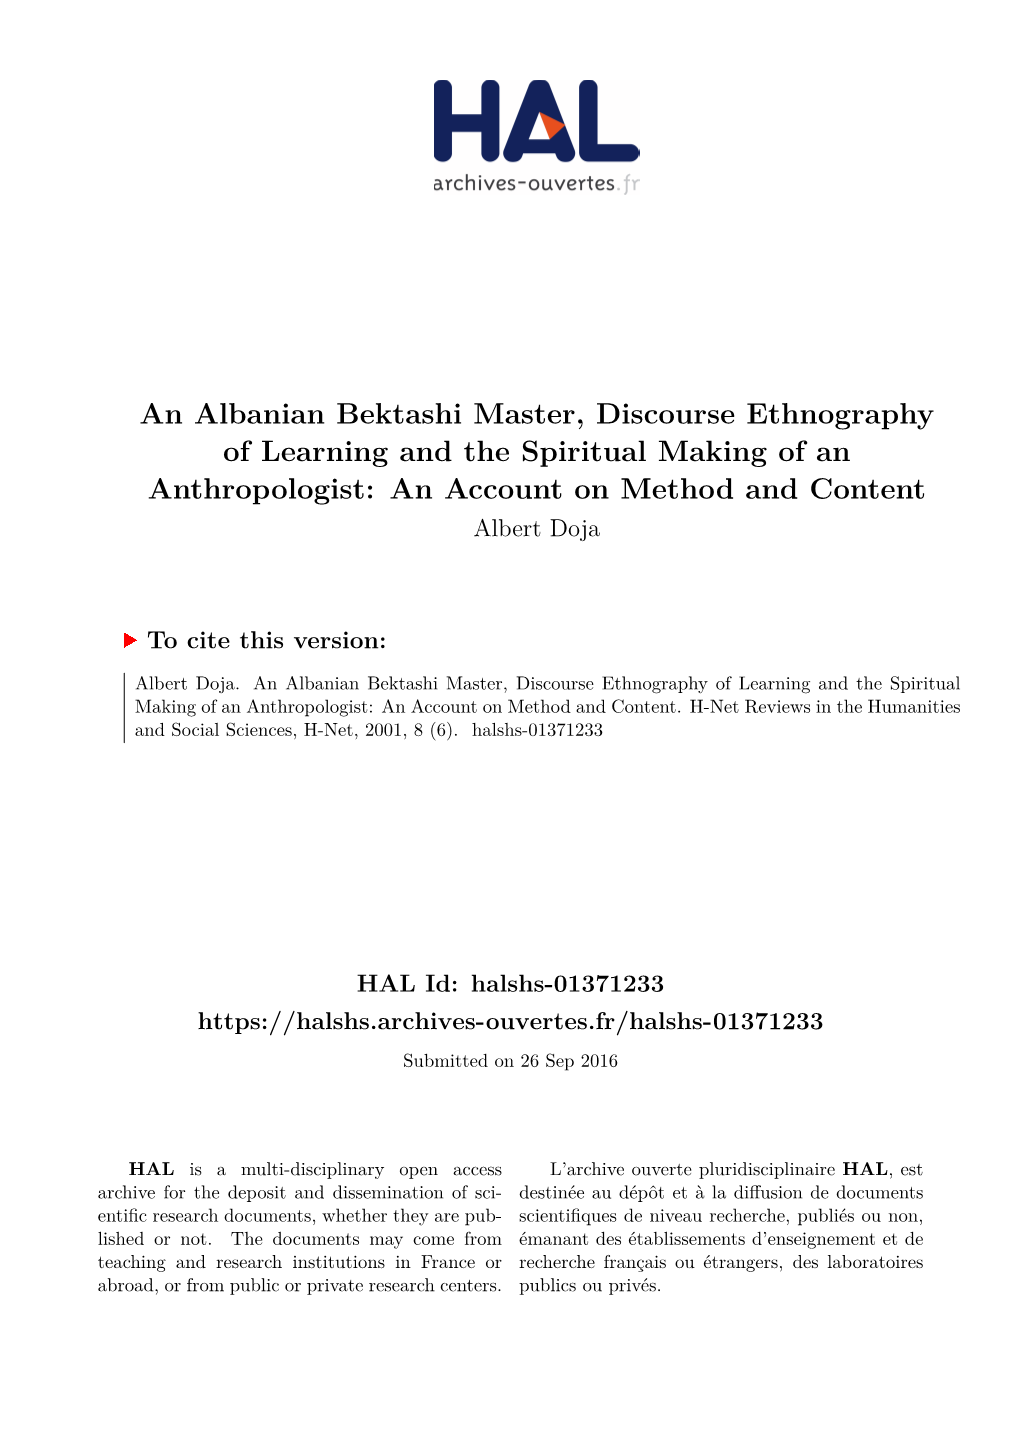 An Albanian Bektashi Master, Discourse Ethnography of Learning and the Spiritual Making of an Anthropologist: an Account on Method and Content Albert Doja